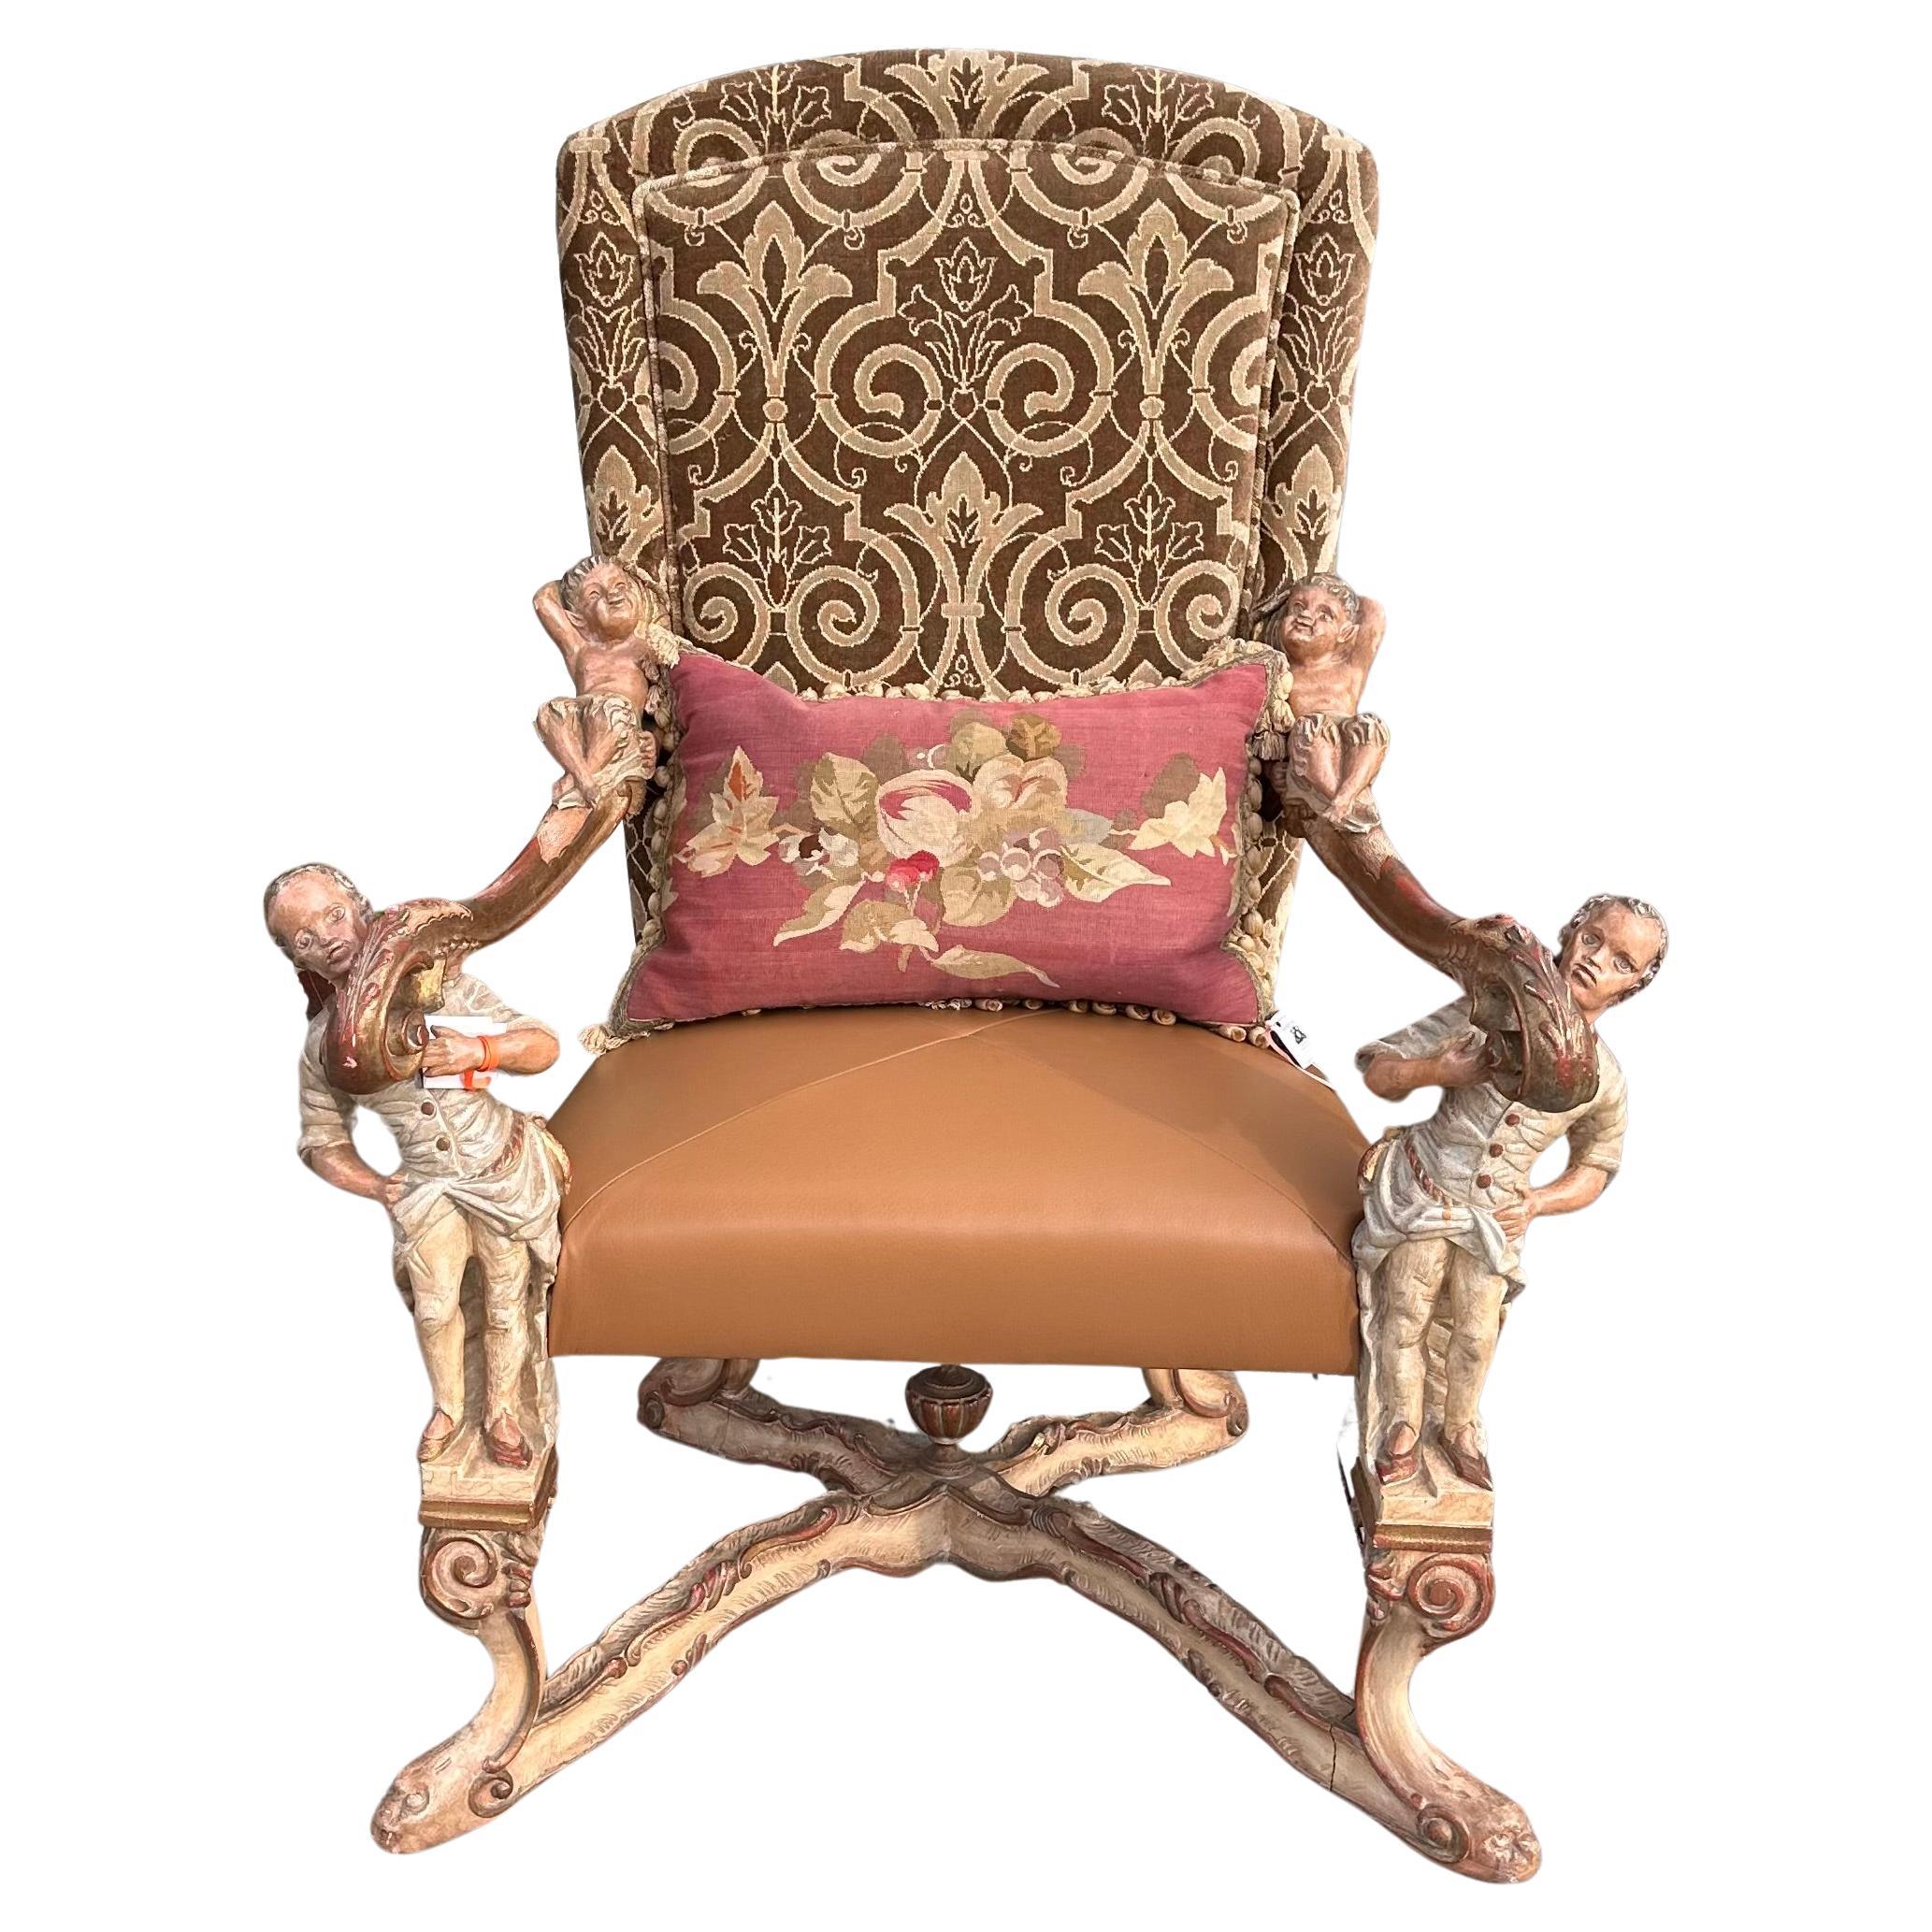 Antique 19th C Venetian Baroque Carved Arm Throne Chair After Andrea Brustolon